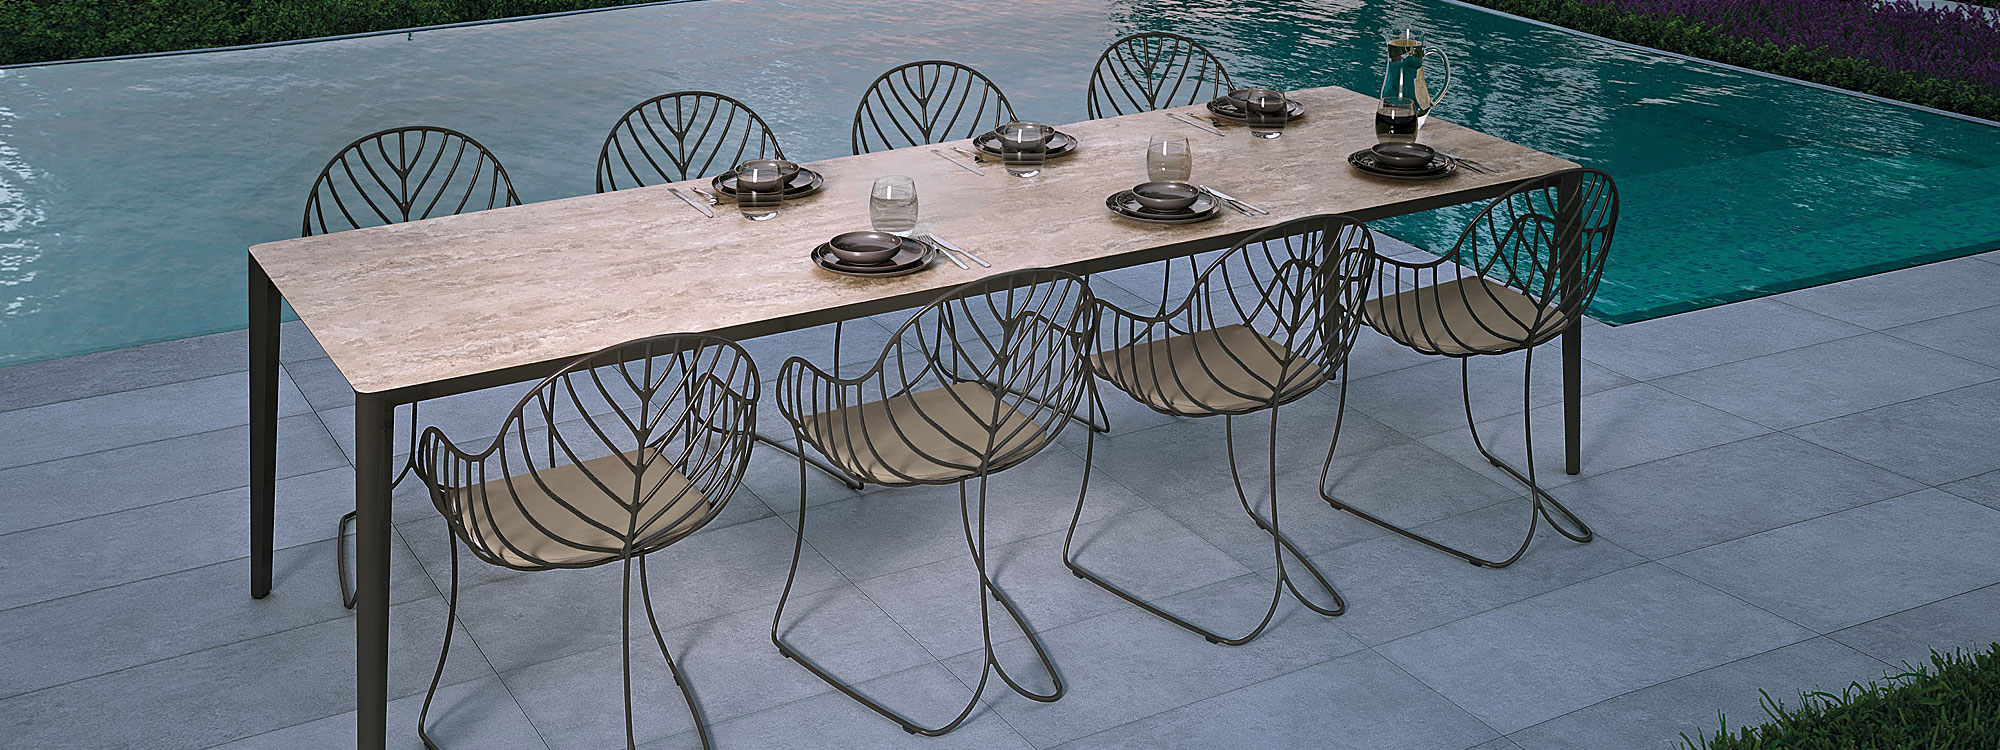 Image of bronze Folia chairs and U-nite table with bronze frame and Travertine ceramic table top by Royal Botania